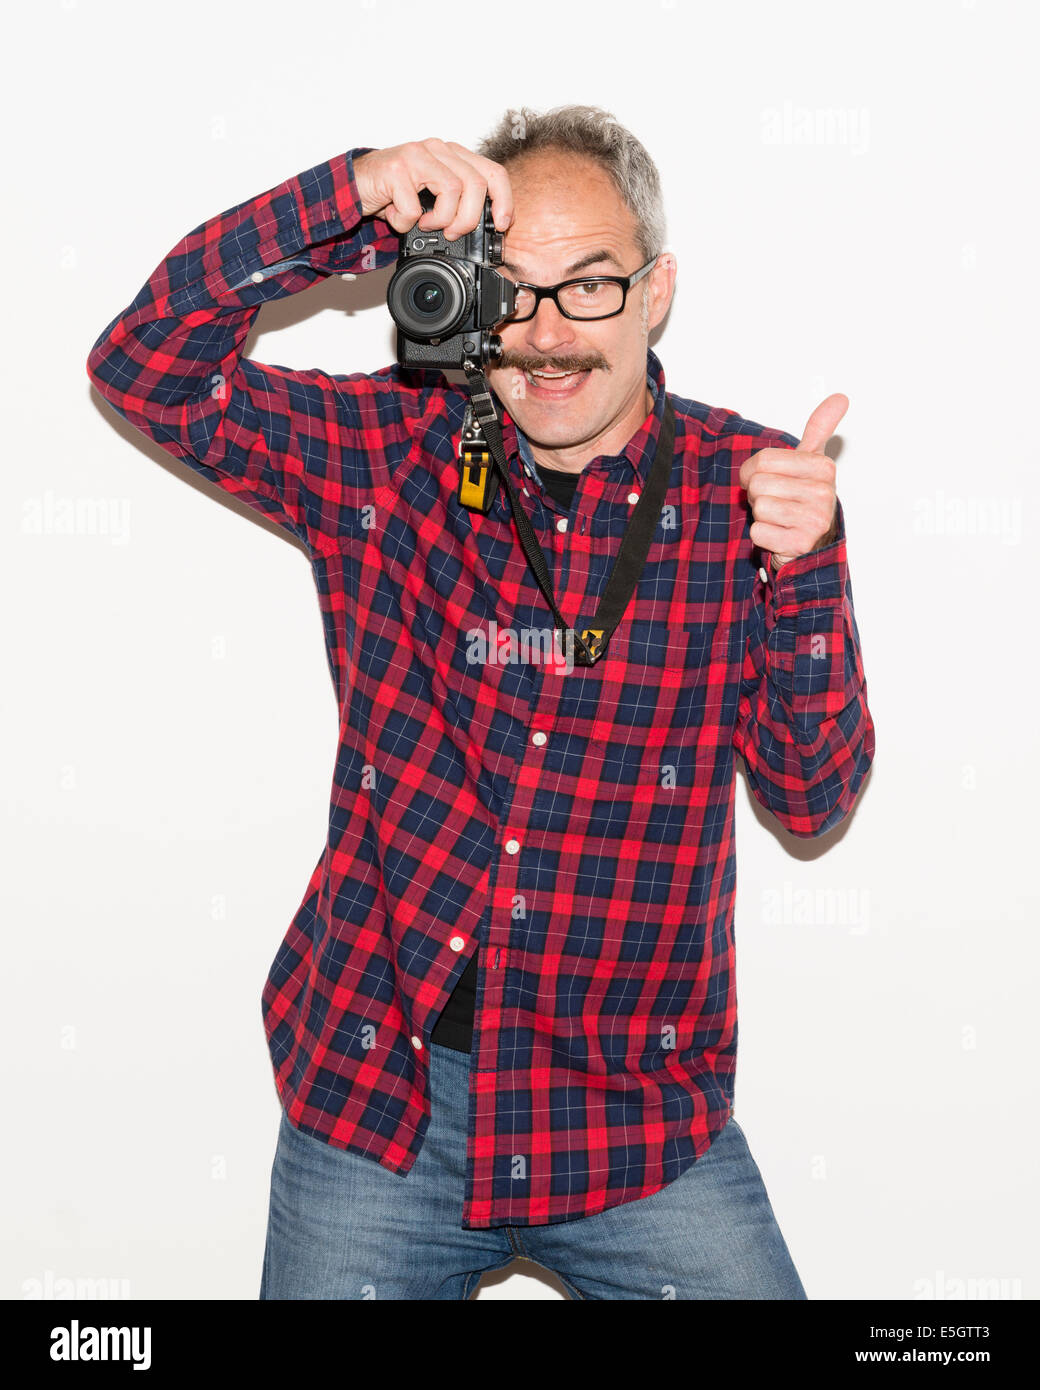 Fashion photographer guy with moustache wearing checked shirt holding a camera and taking a picture while giving thumbs up. Stock Photo